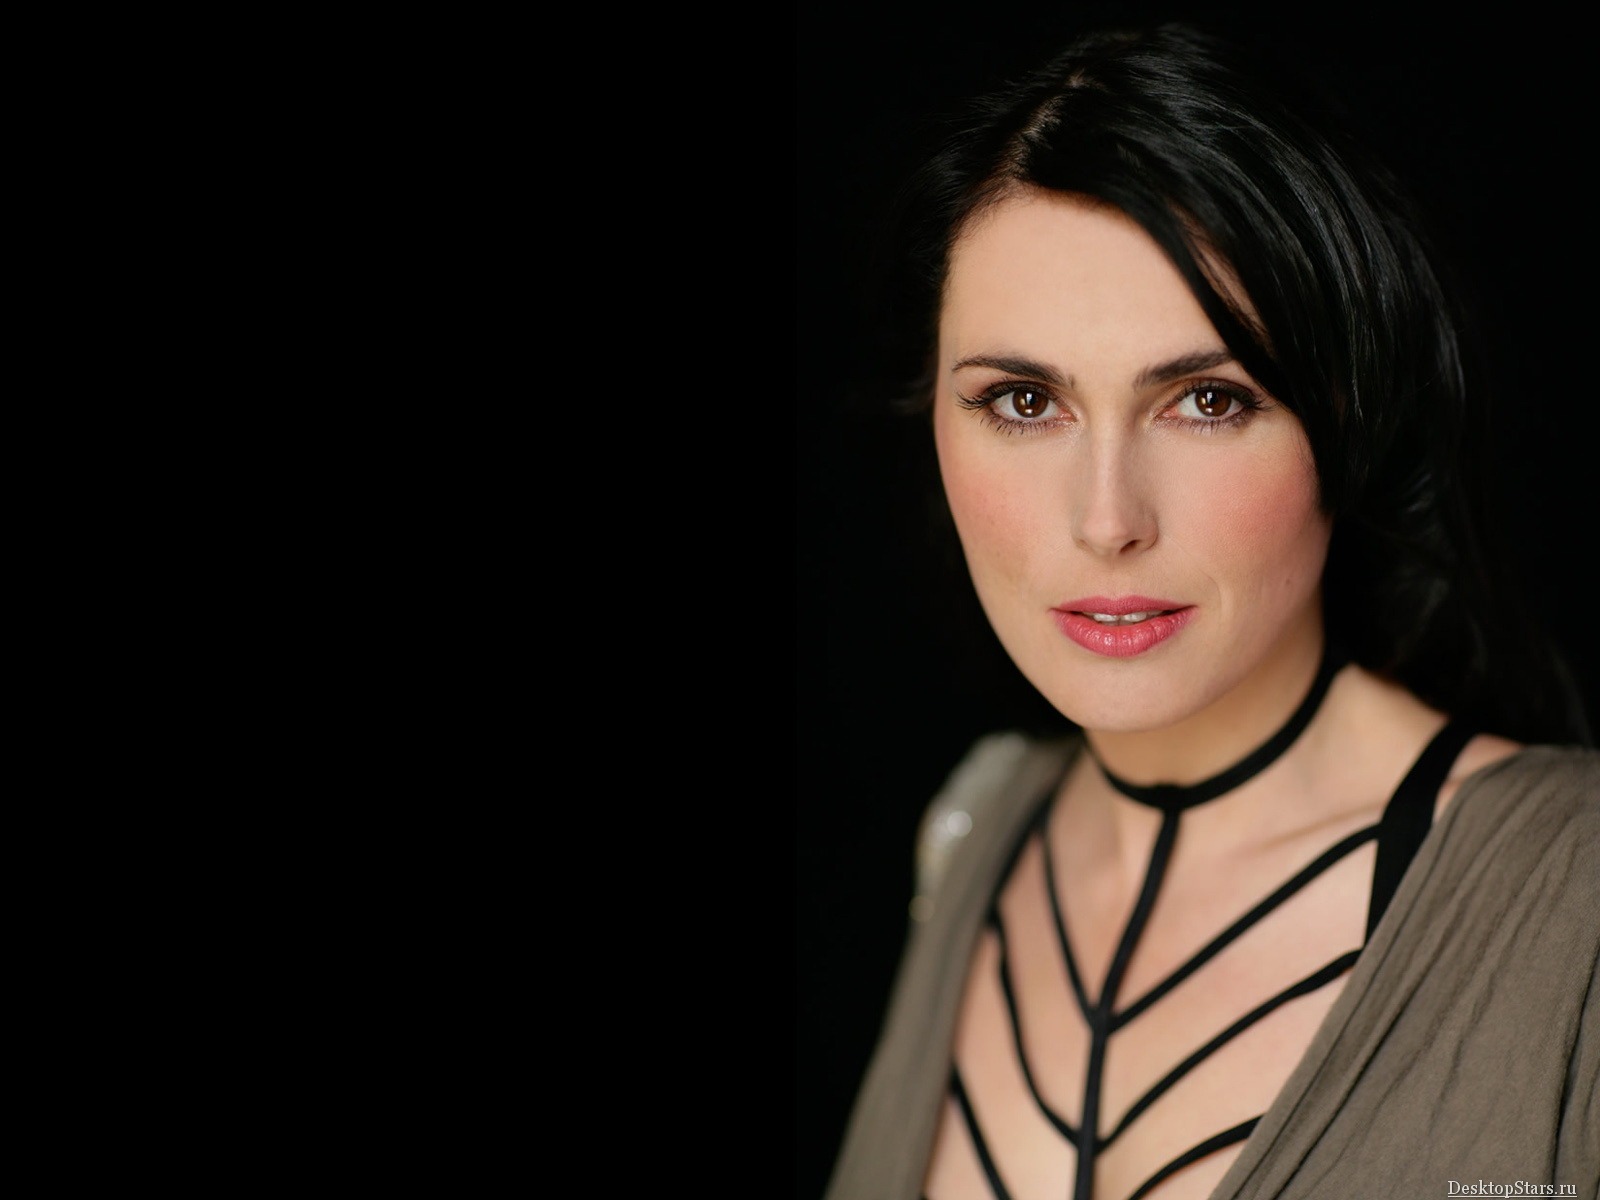 Sharon den Adel #005 - 1600x1200 Wallpapers Pictures Photos Images